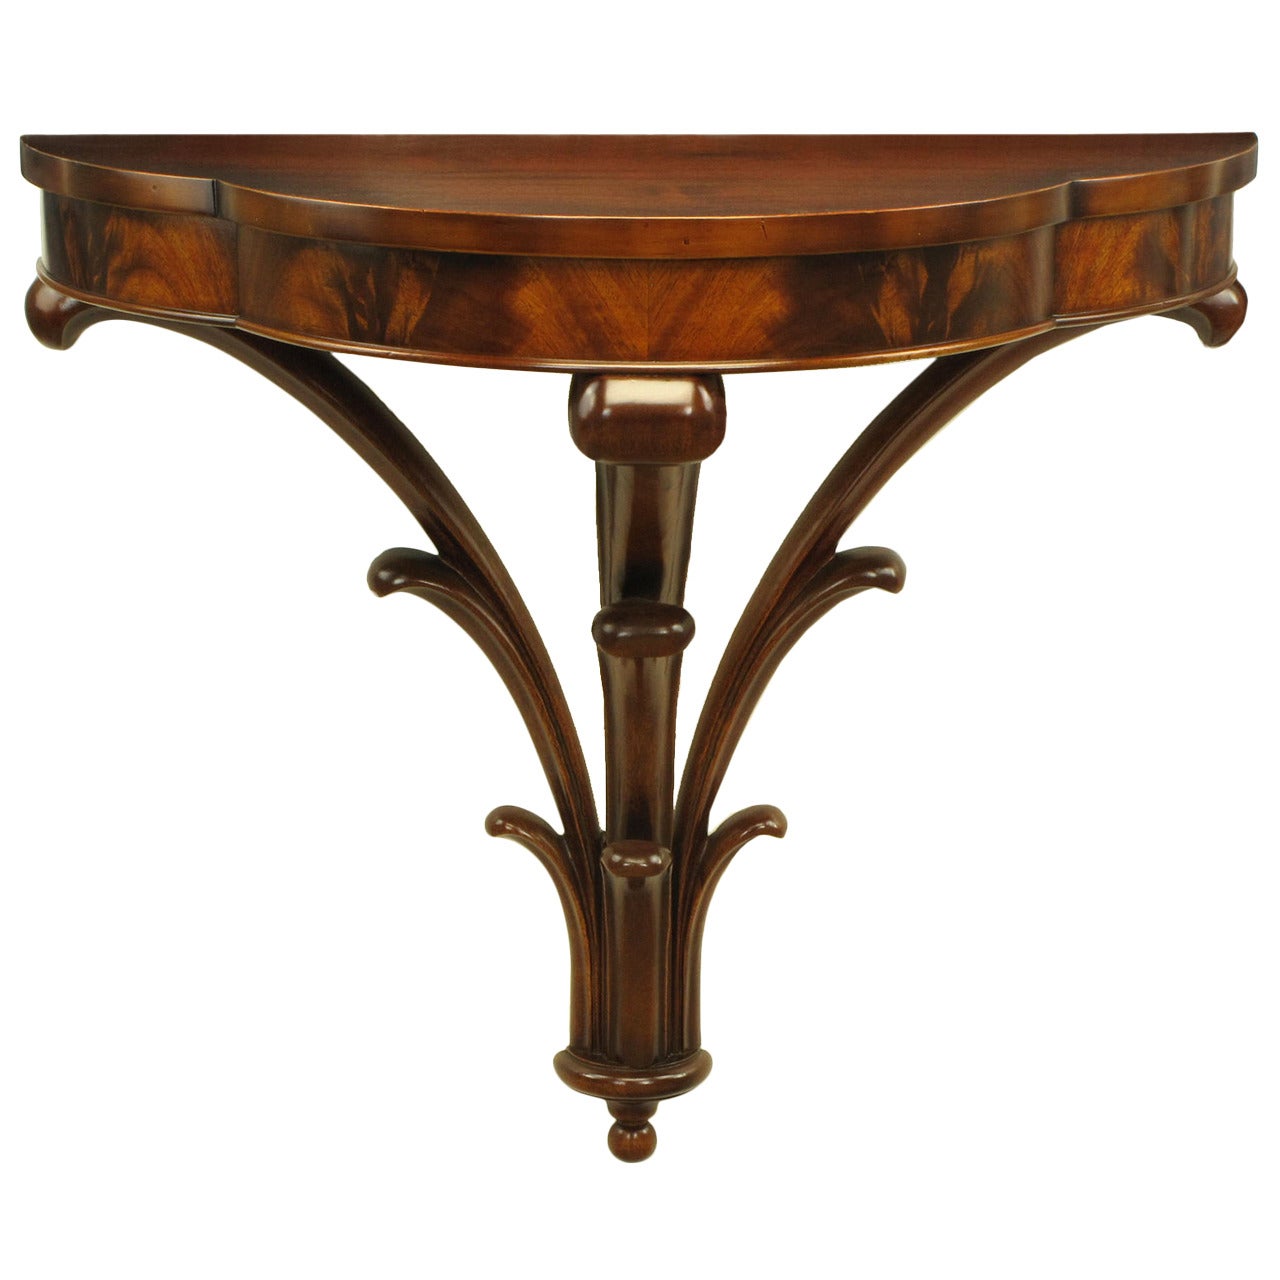 1940s Bookmatched Mahogany Demilune Wall Console with Plume Base